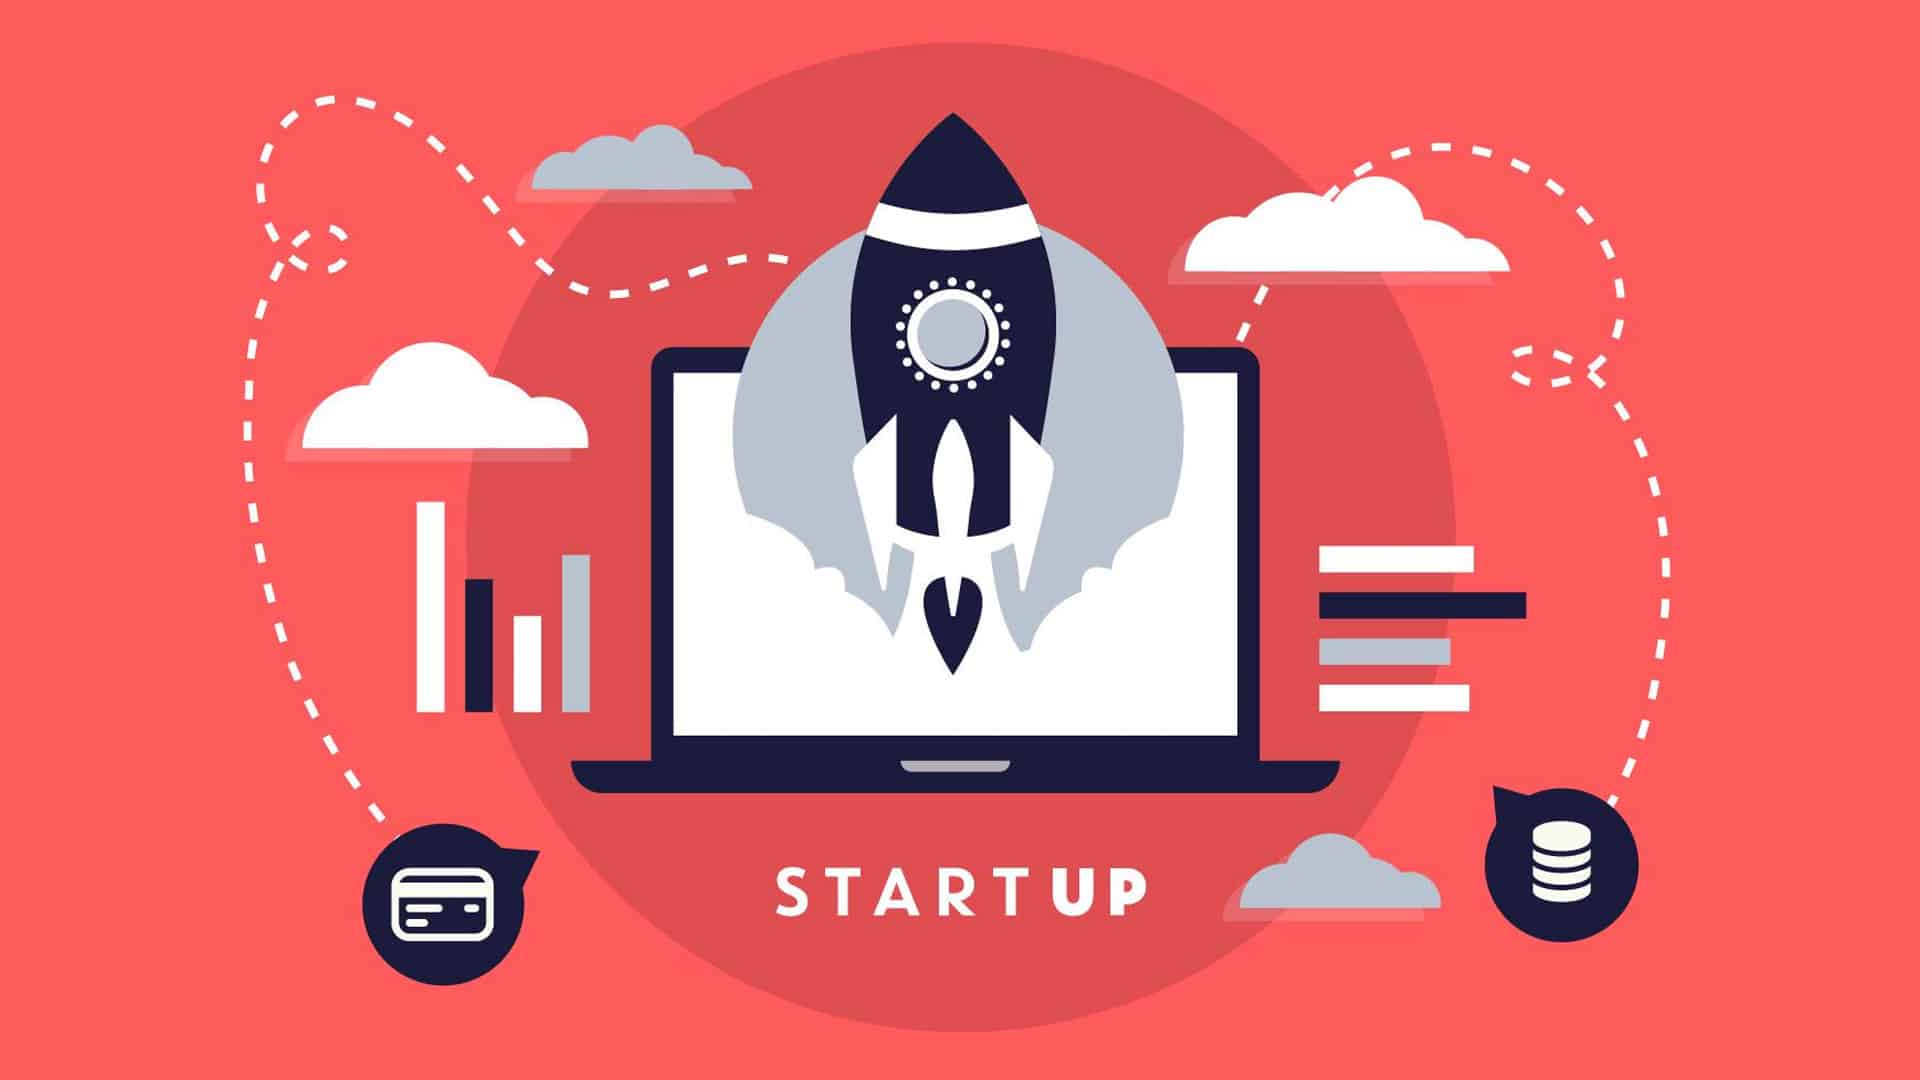 Indian startups raised USD 42 bn in 2021: Report